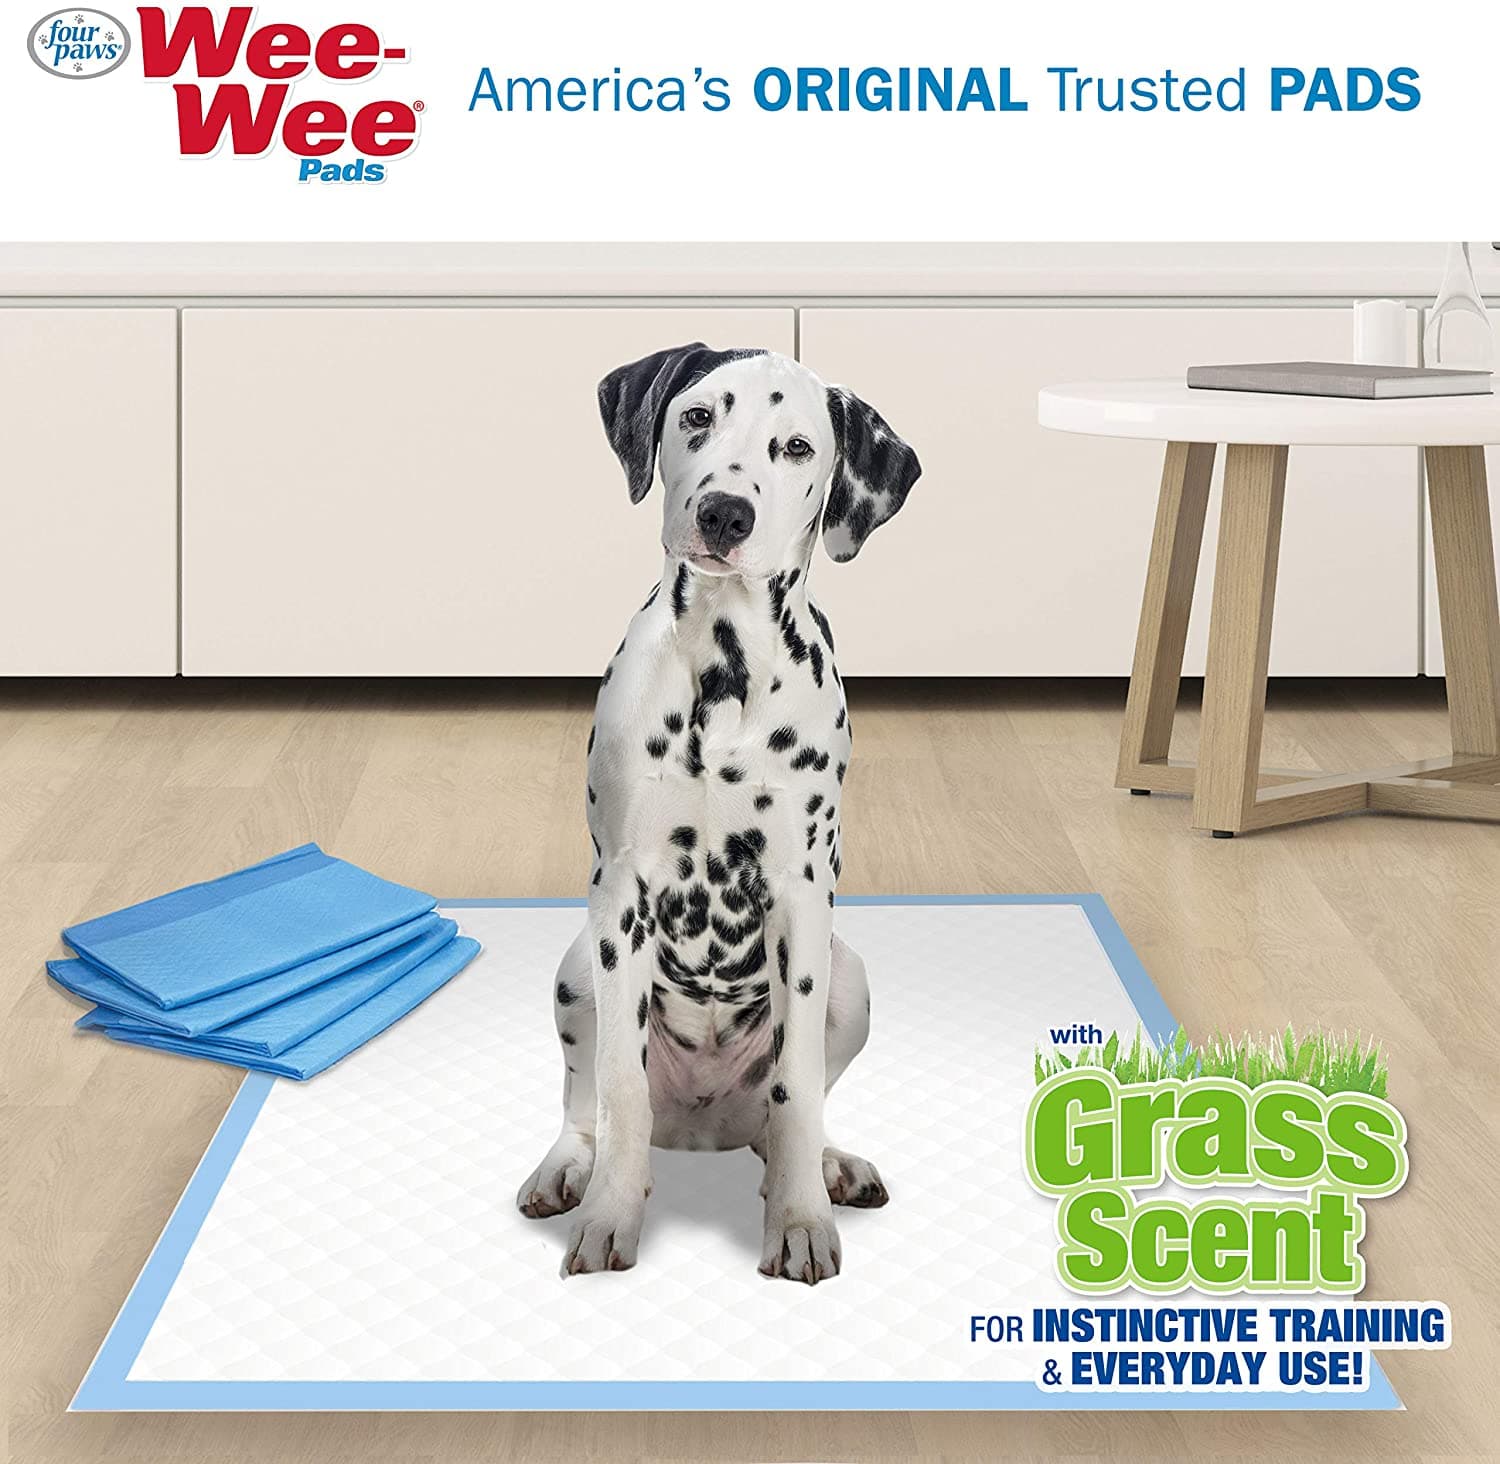 Four Paws Wee-Wee Grass-Scent Pads 100 Count Box